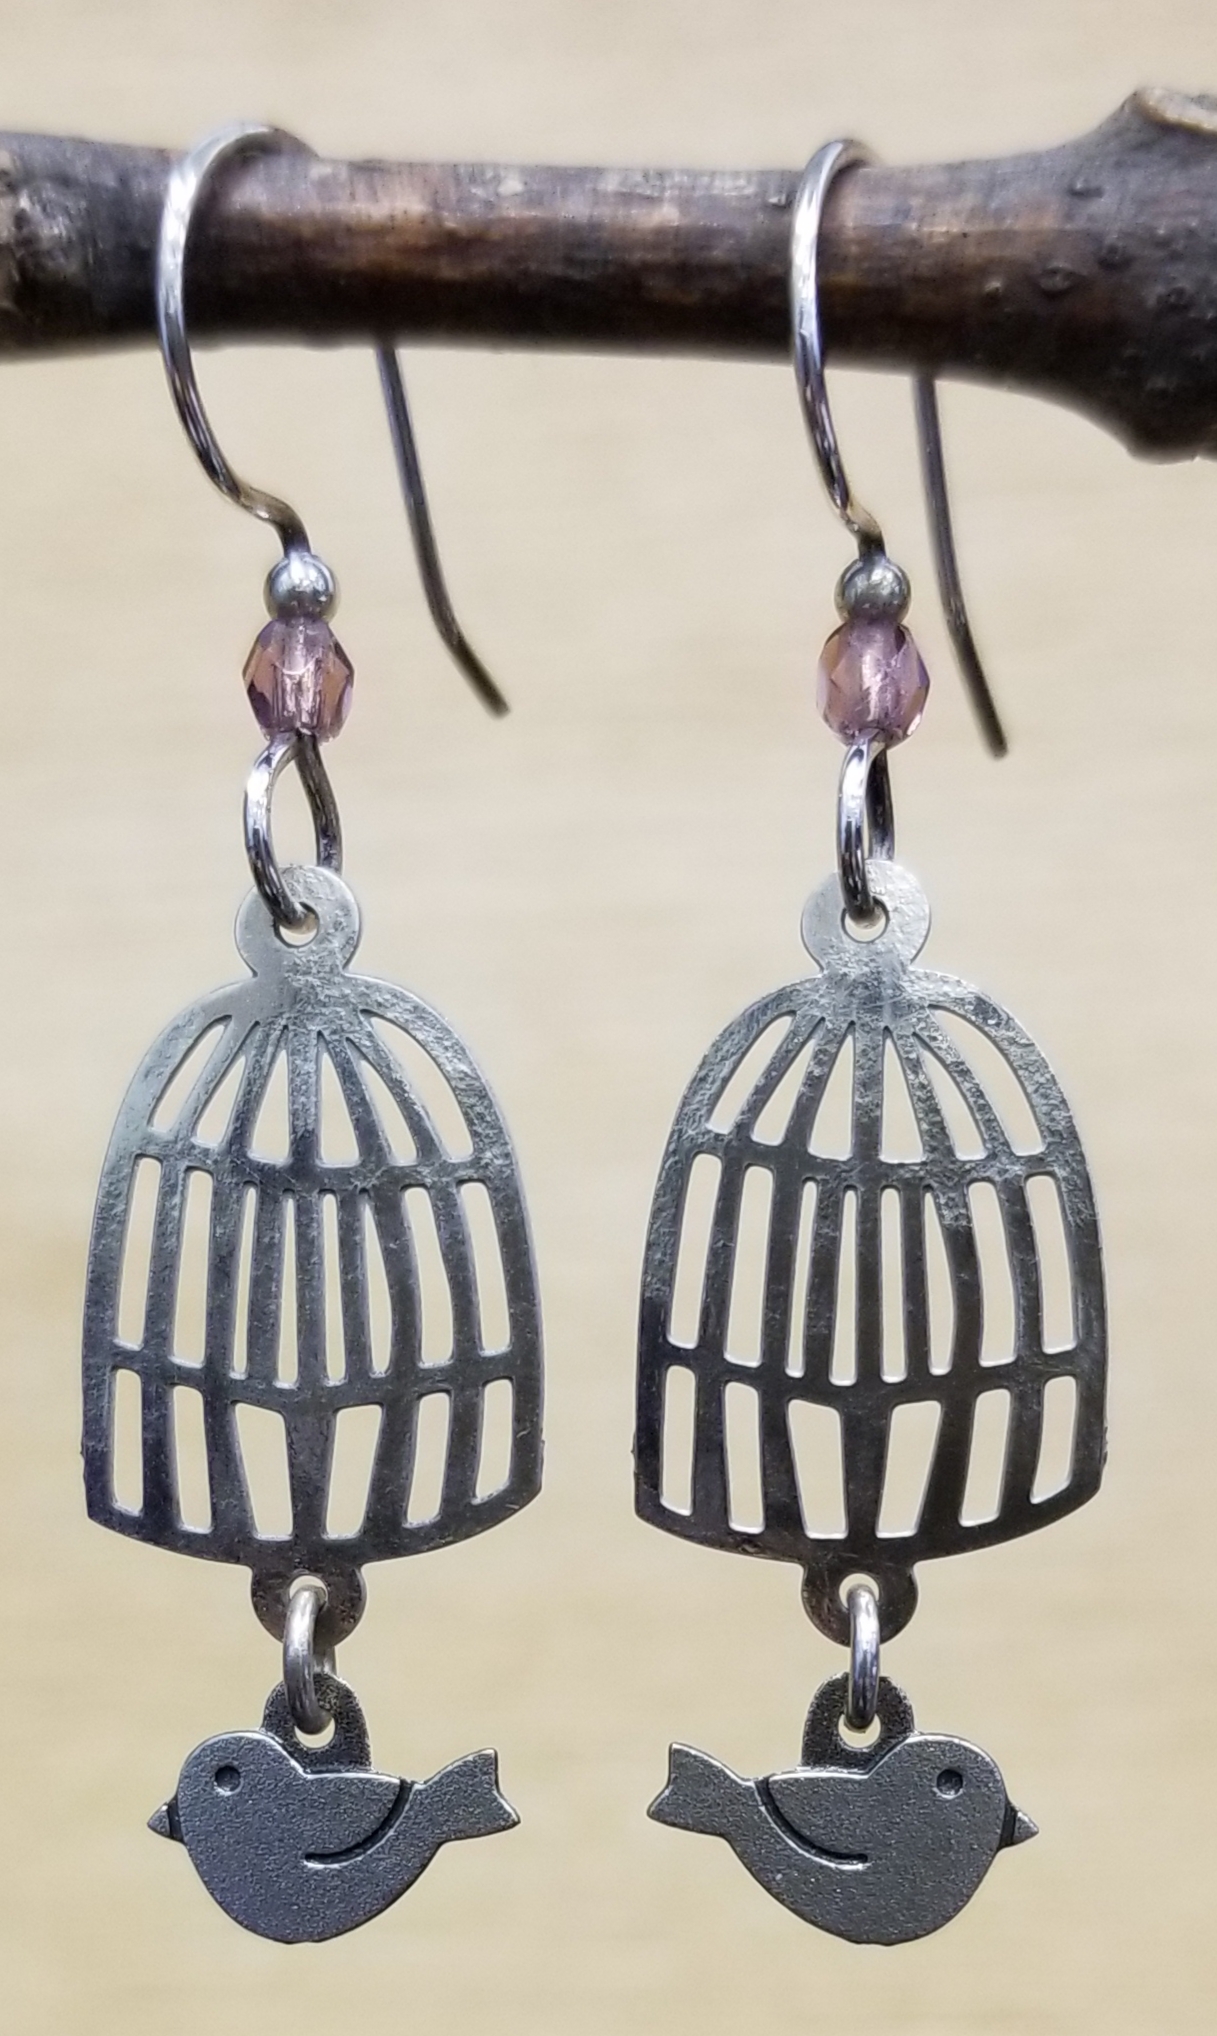 Bird and birdcage earrings with violet bead